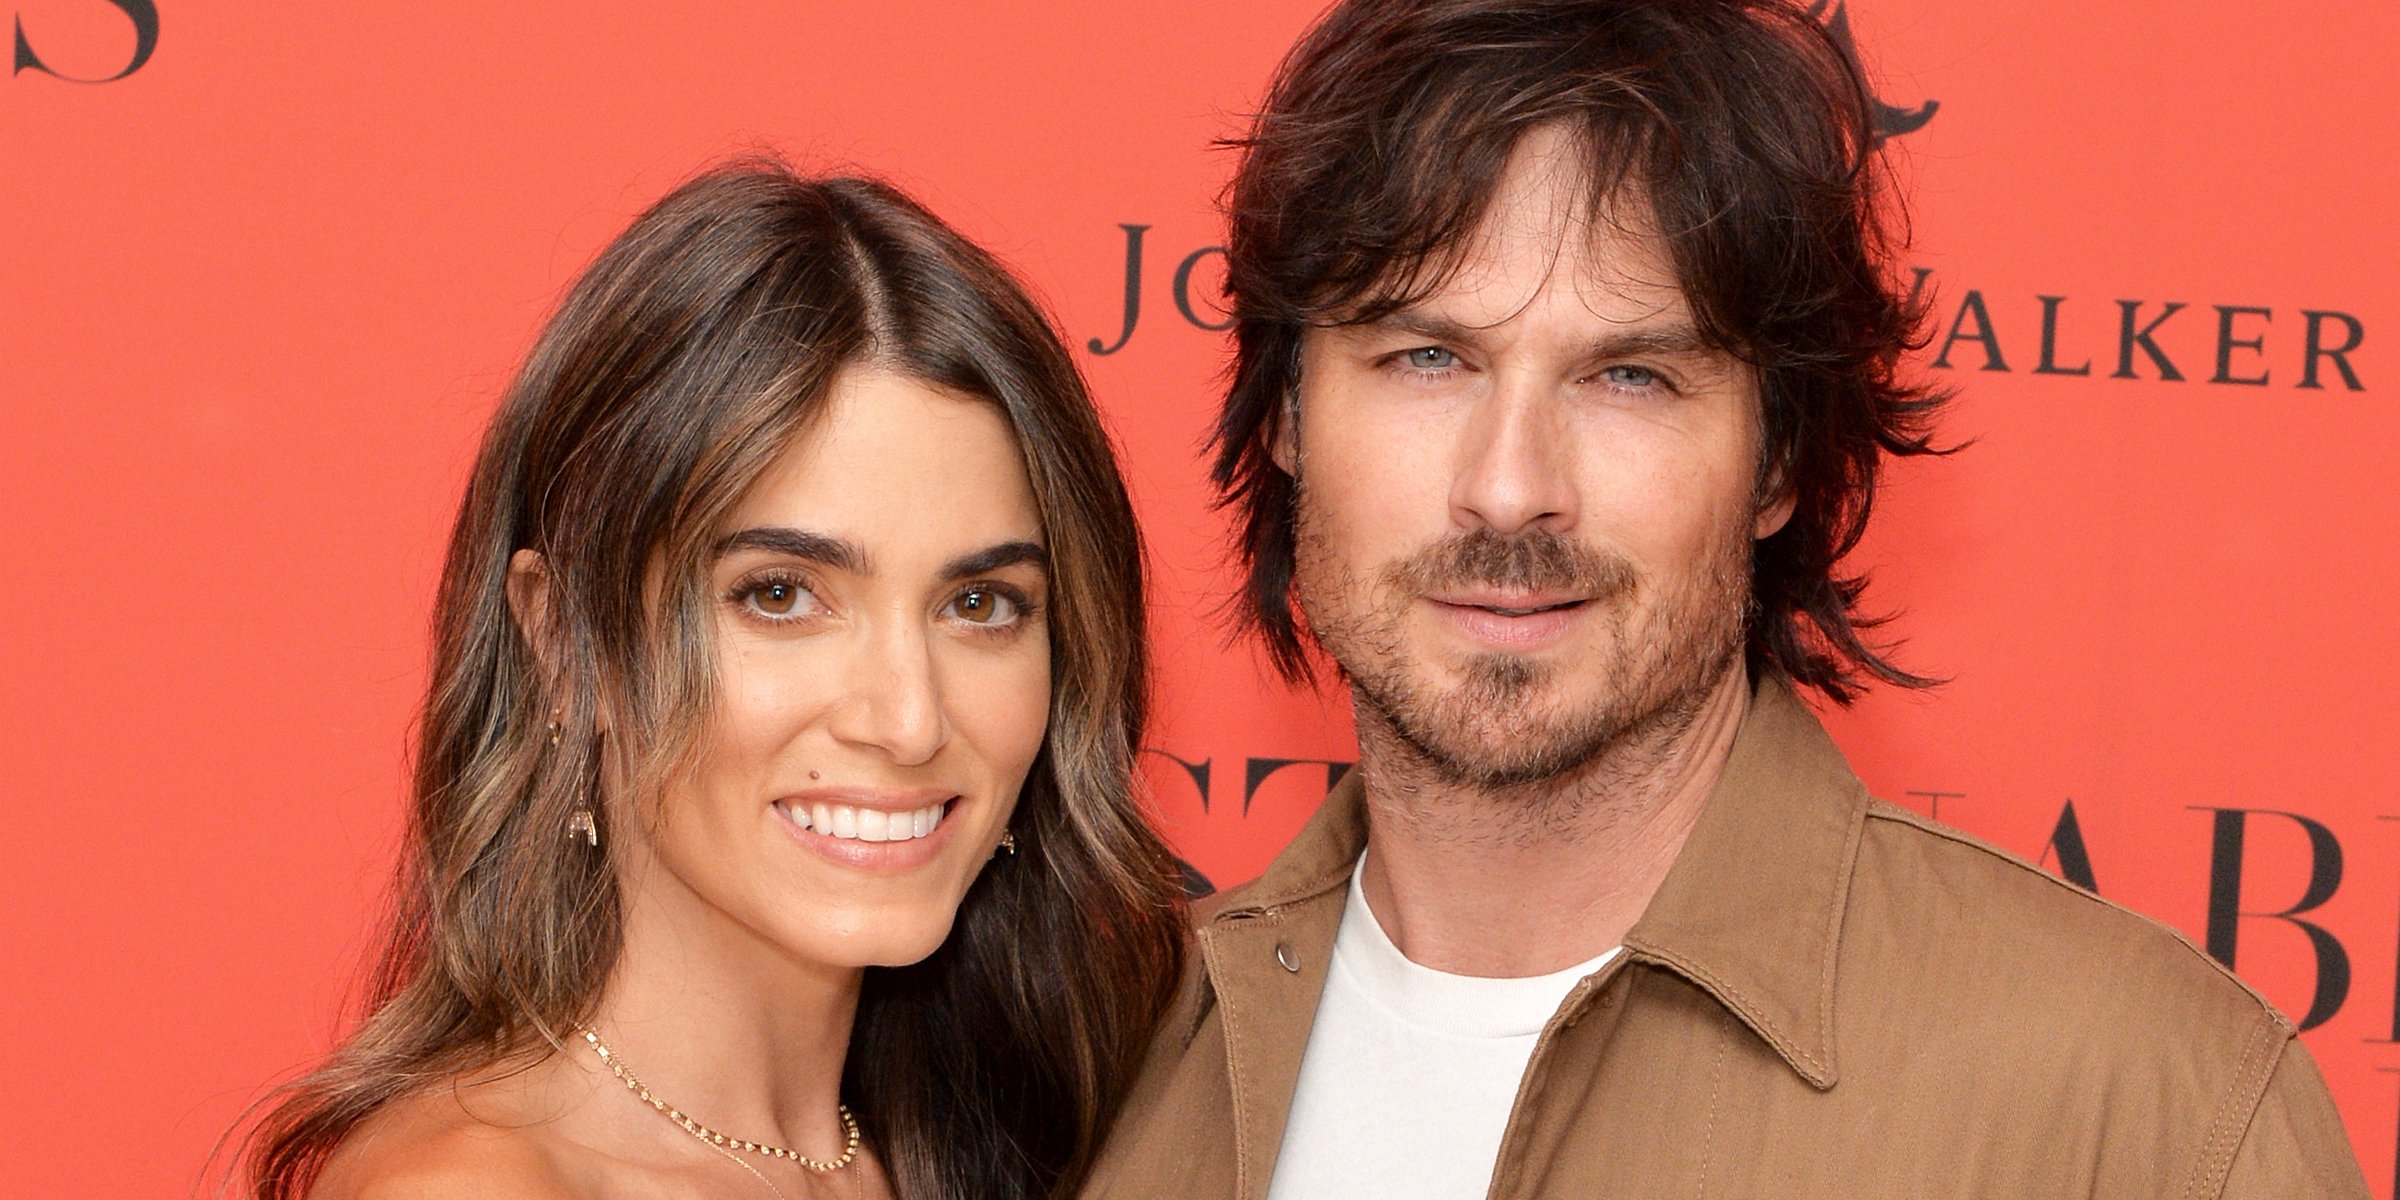 Ian Somerhalder and Nikki Reed | Source: Getty Images